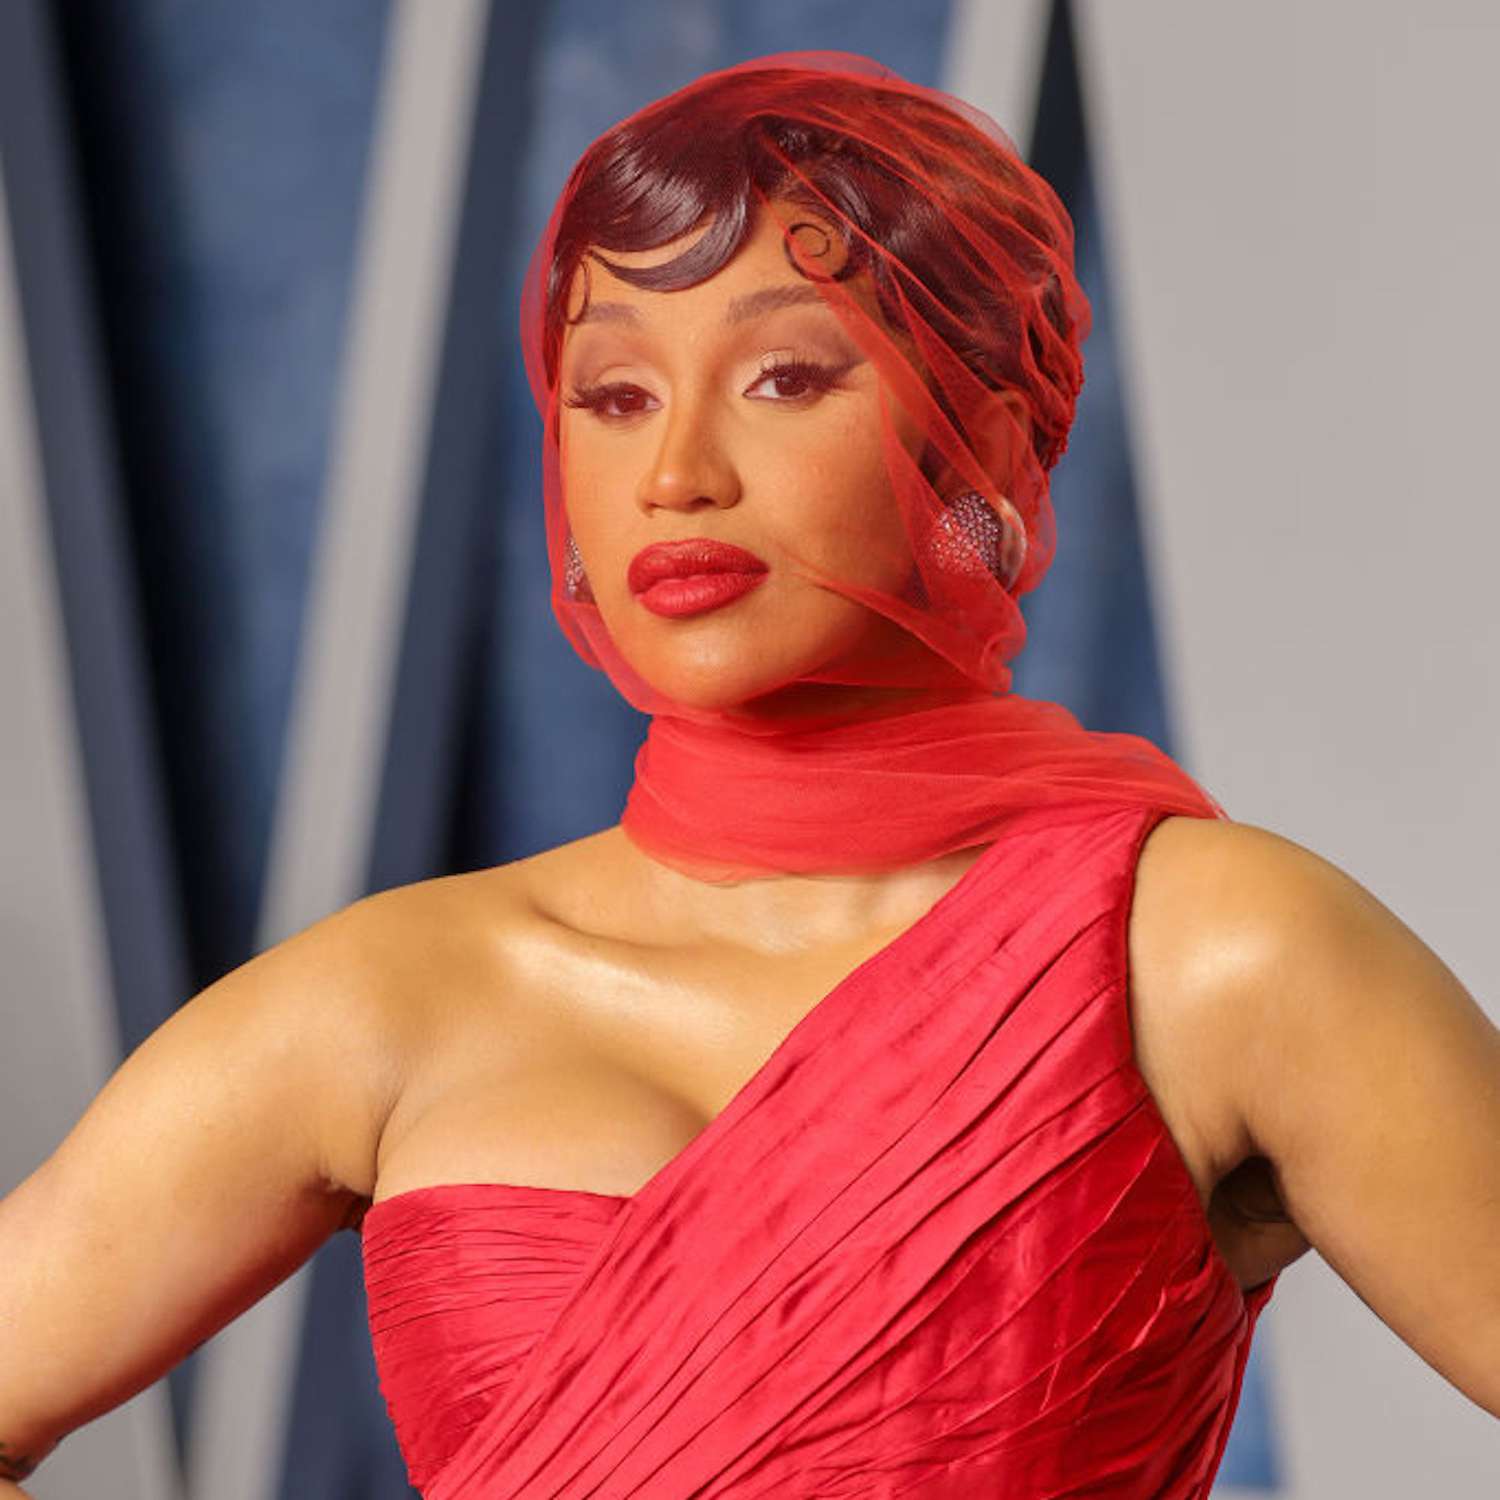 Cardi B with pin curls and a red scarf over her face